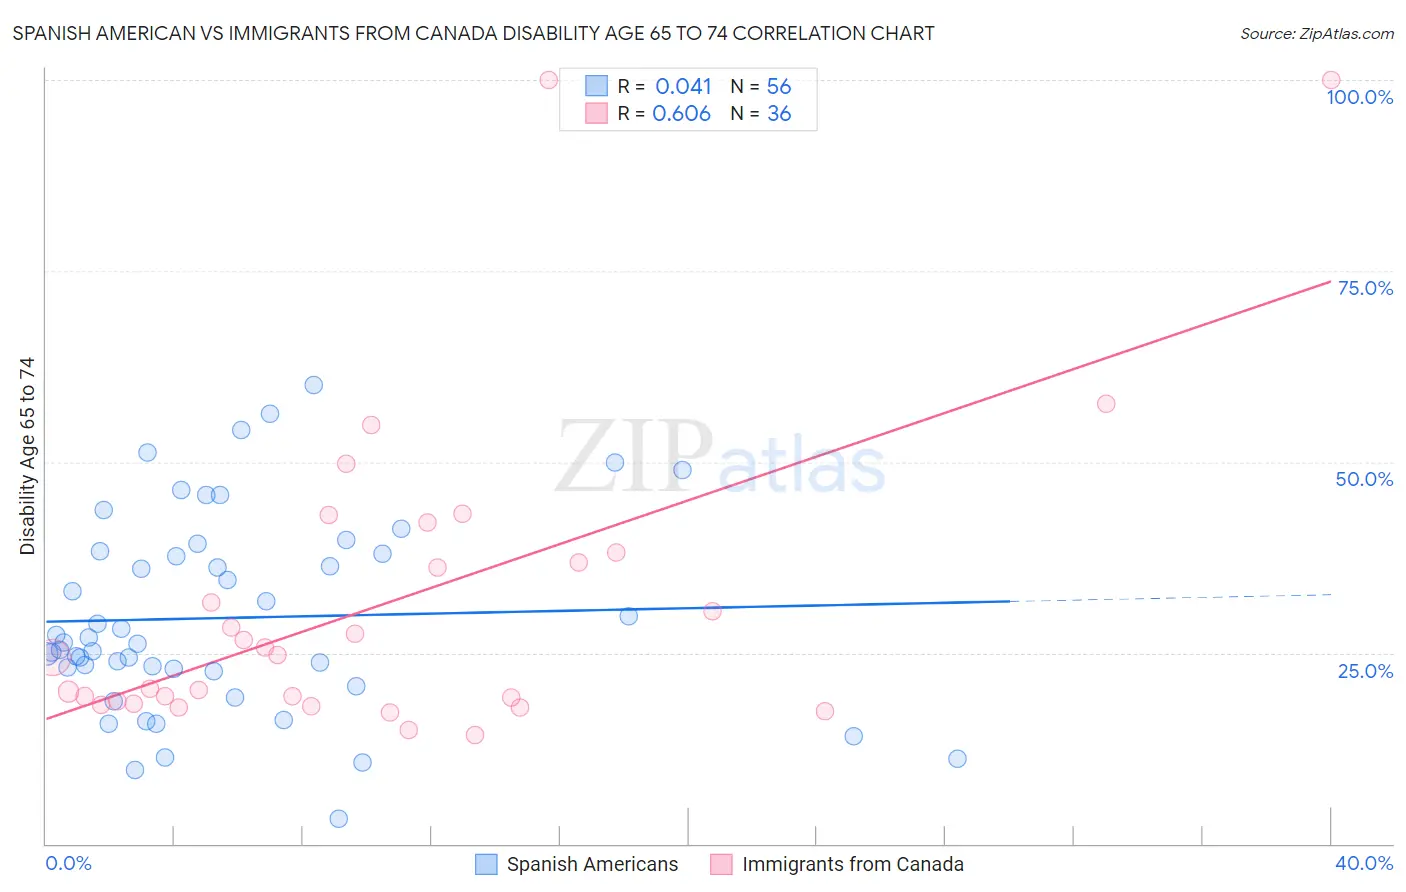 Spanish American vs Immigrants from Canada Disability Age 65 to 74